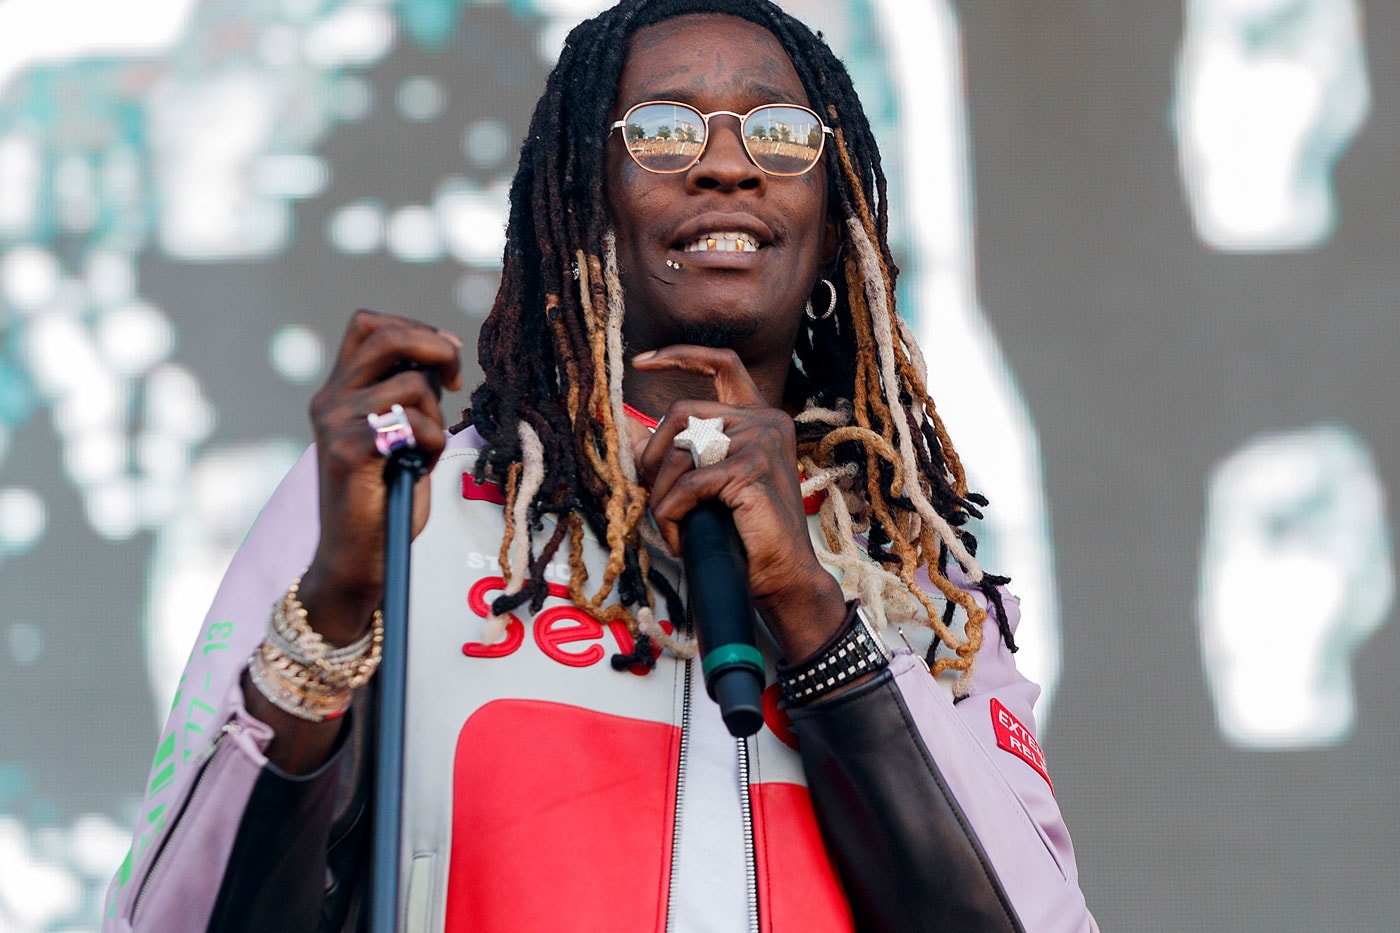 Young Thug new project title Slime Language music 2018 ysl records june